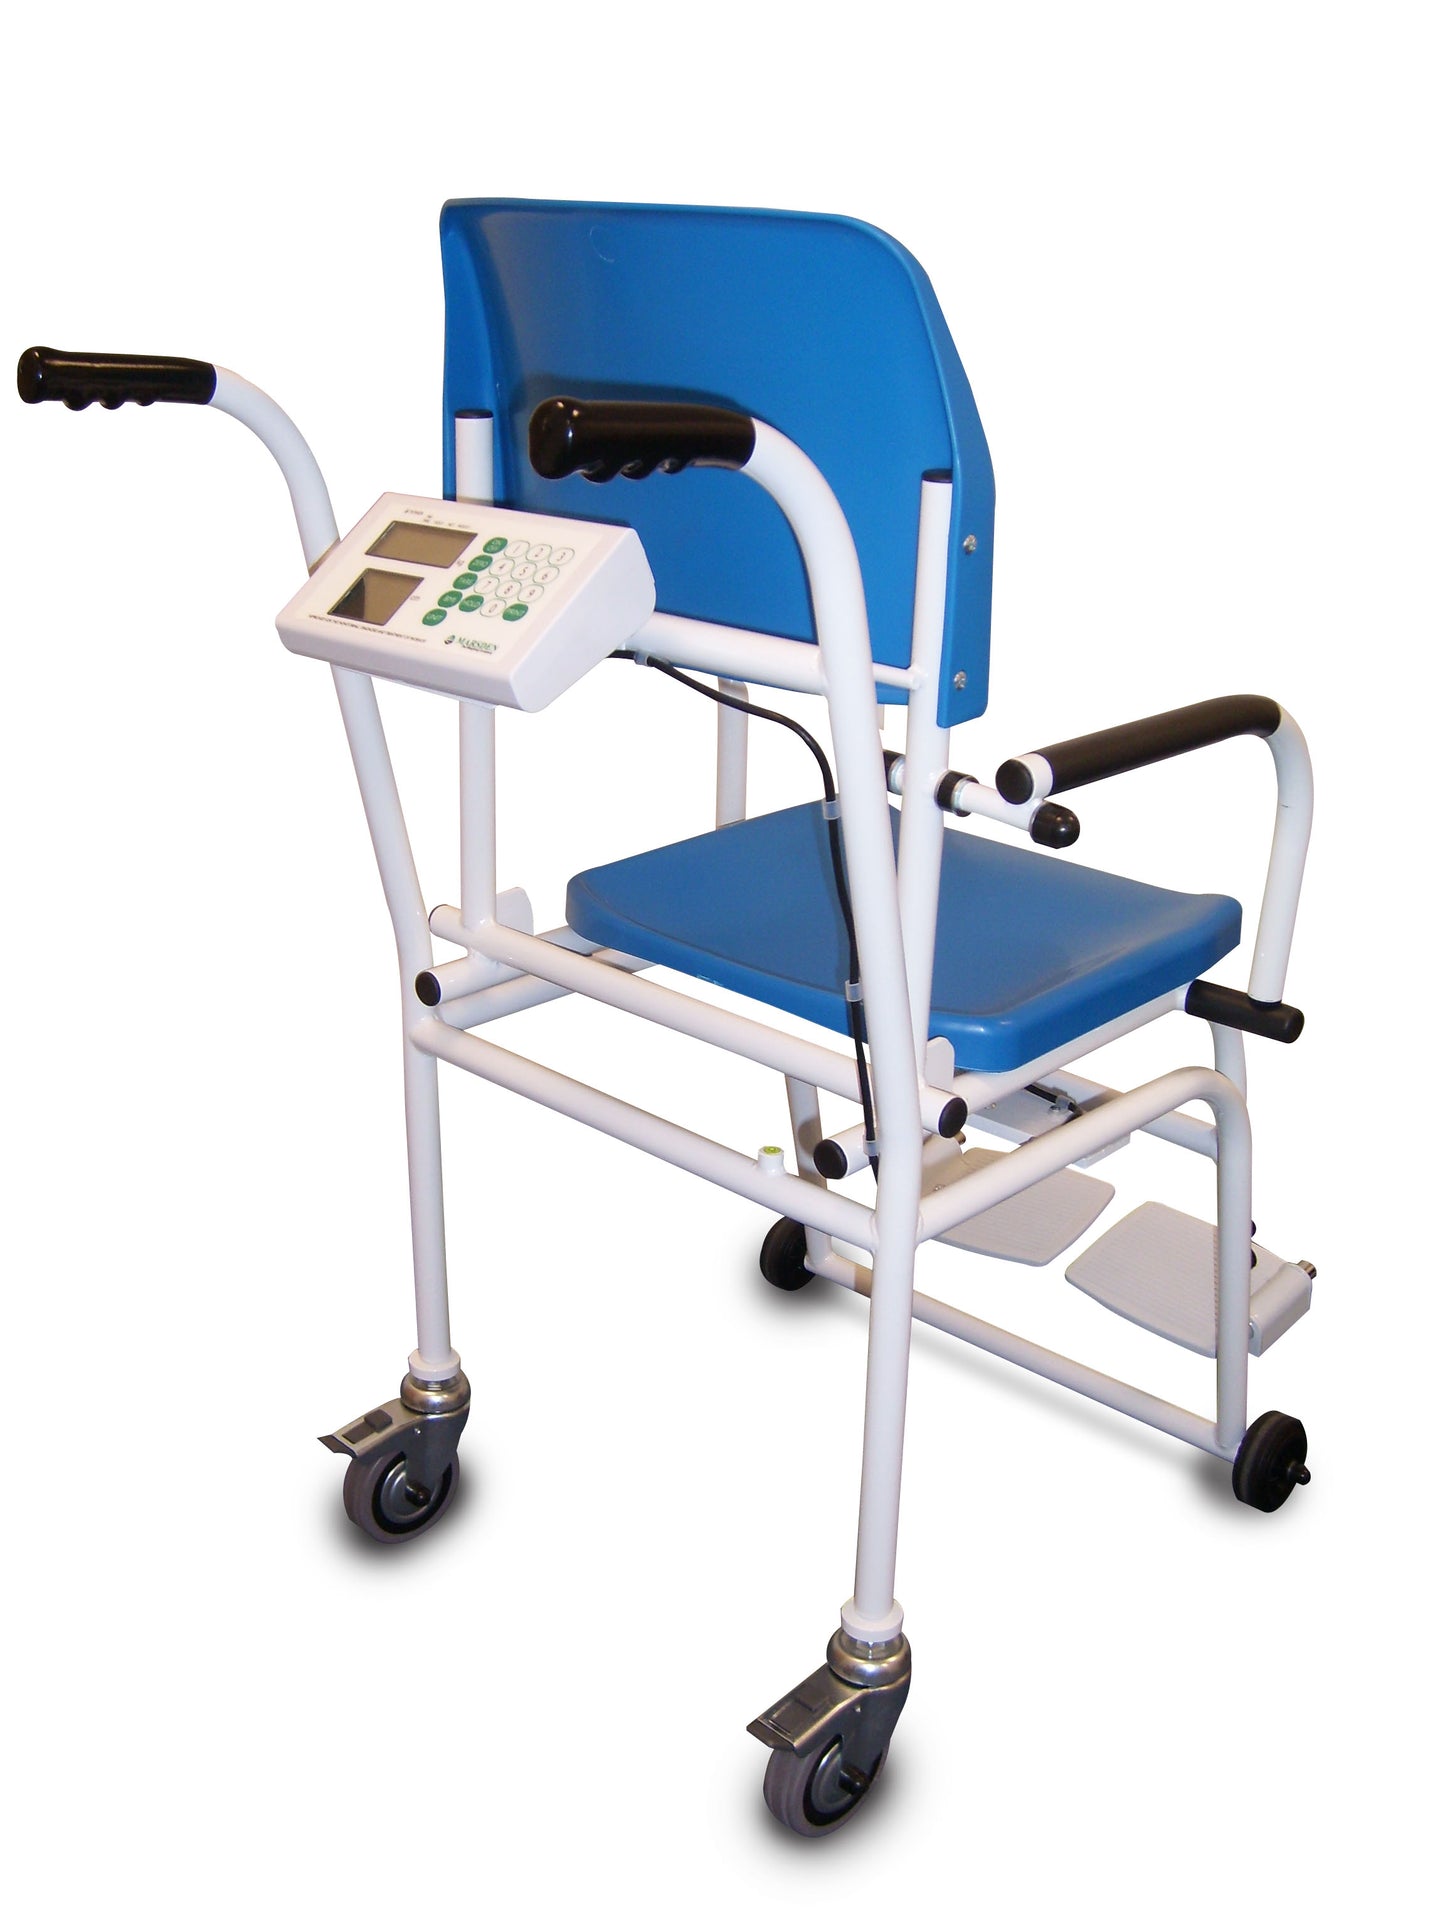 Marsden - Professional, Easy To Use Chair Scale with BMI - Approved